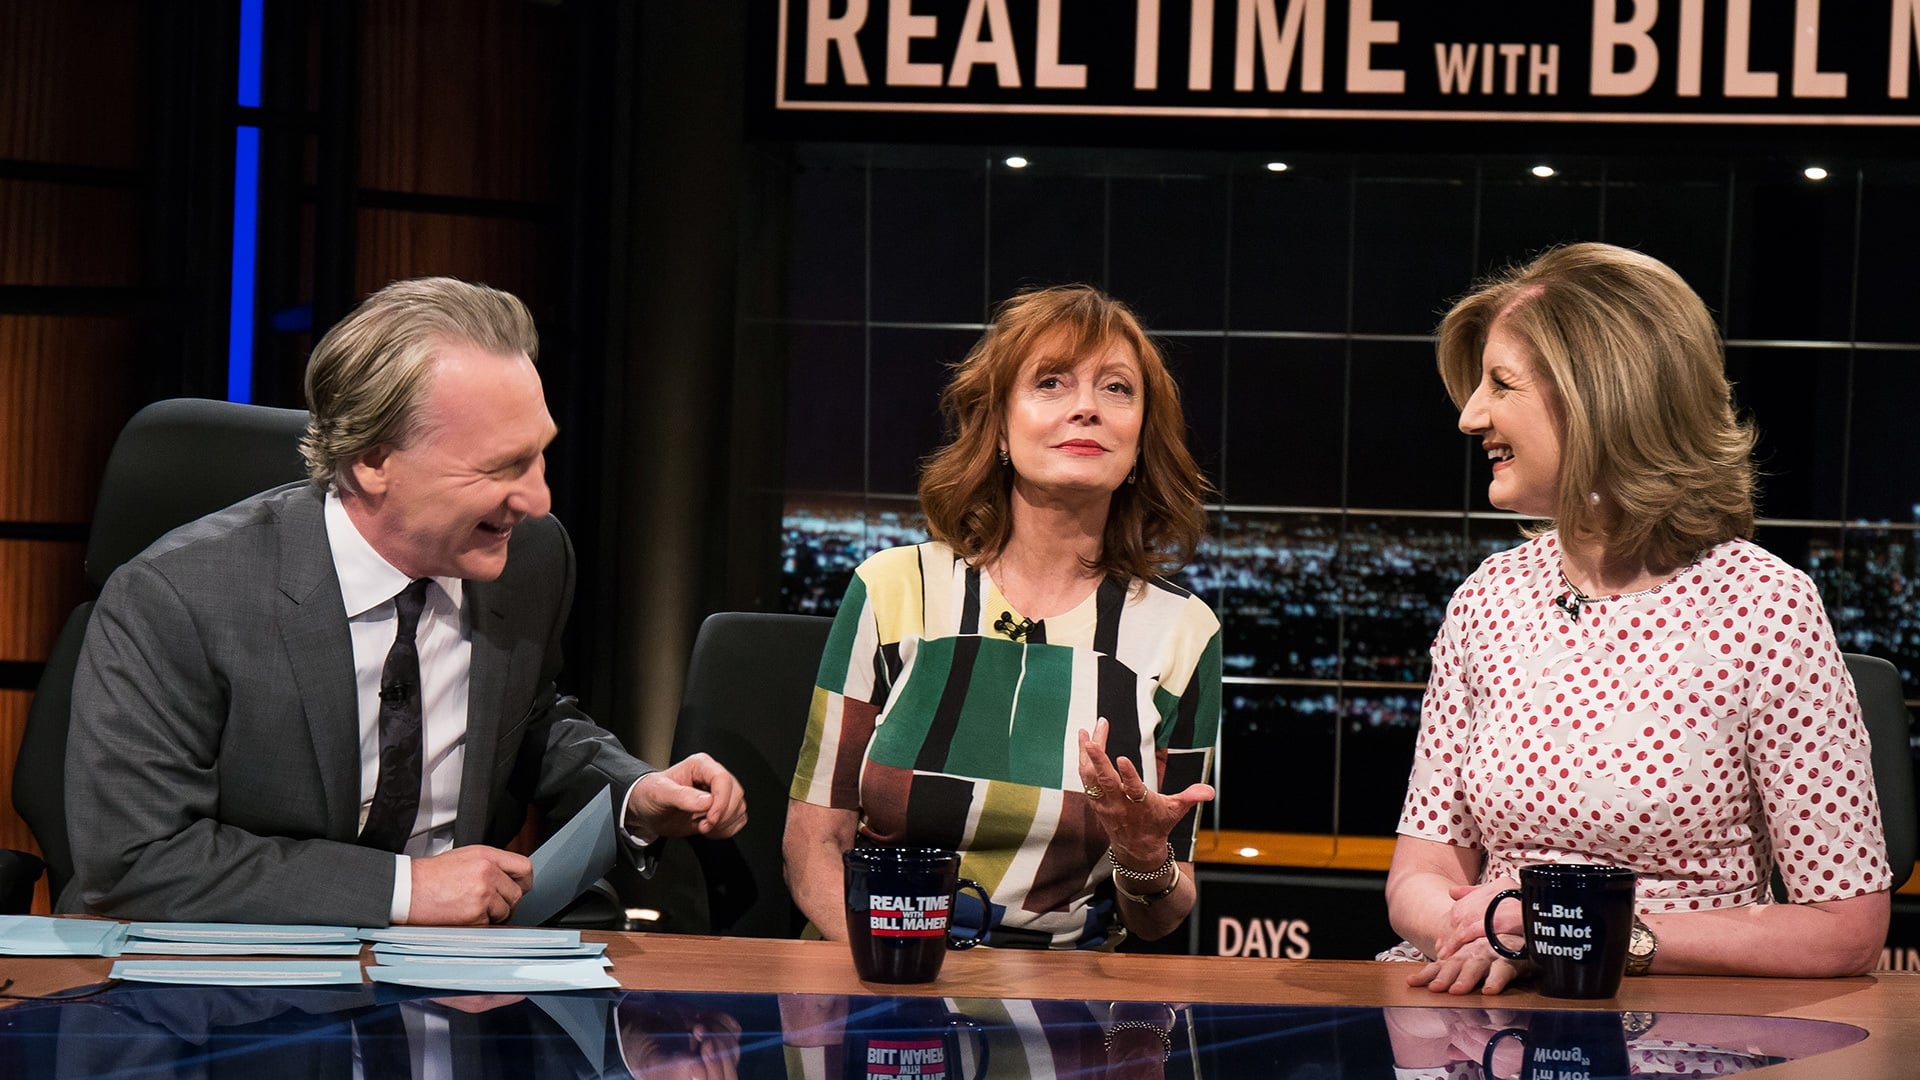 Real Time with Bill Maher Staffel 14 :Folge 12 